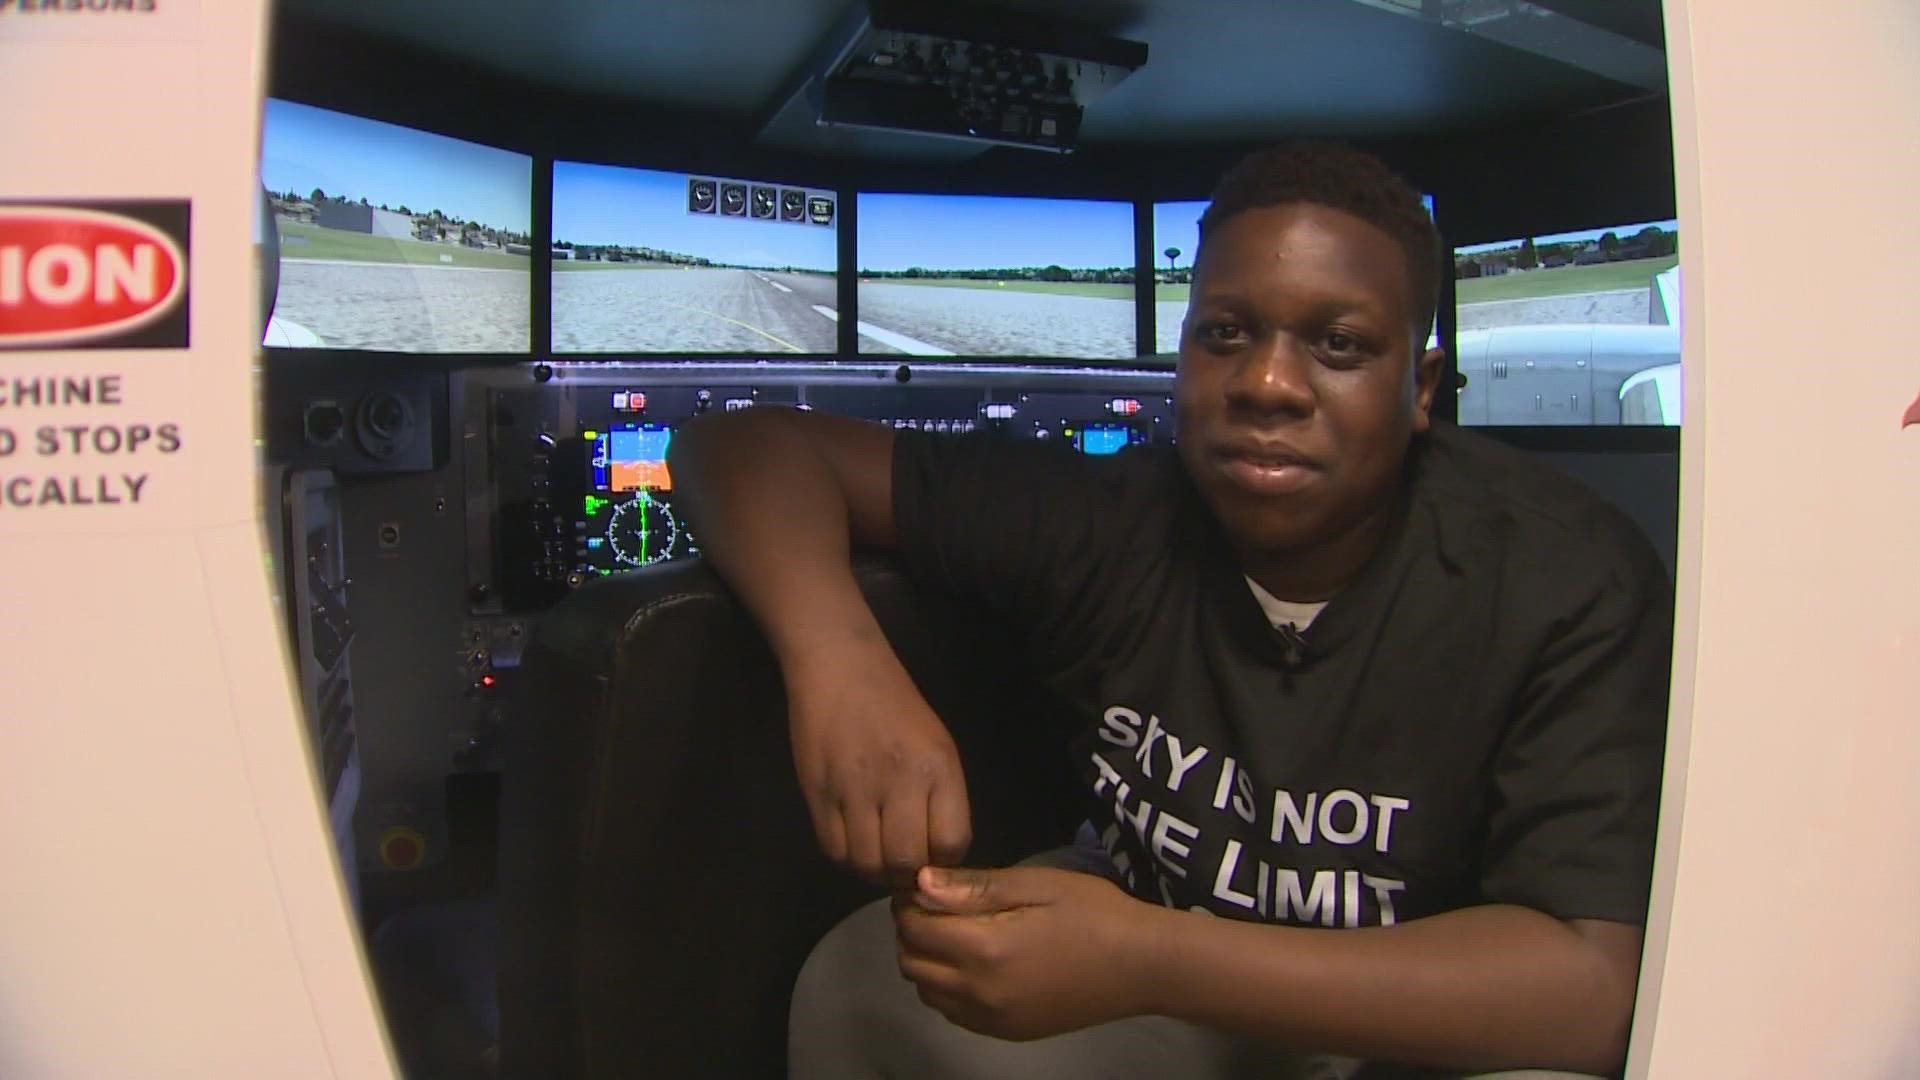 The academy, which is in need of funding, has helped over 200 Seattle-area kids become pilots.